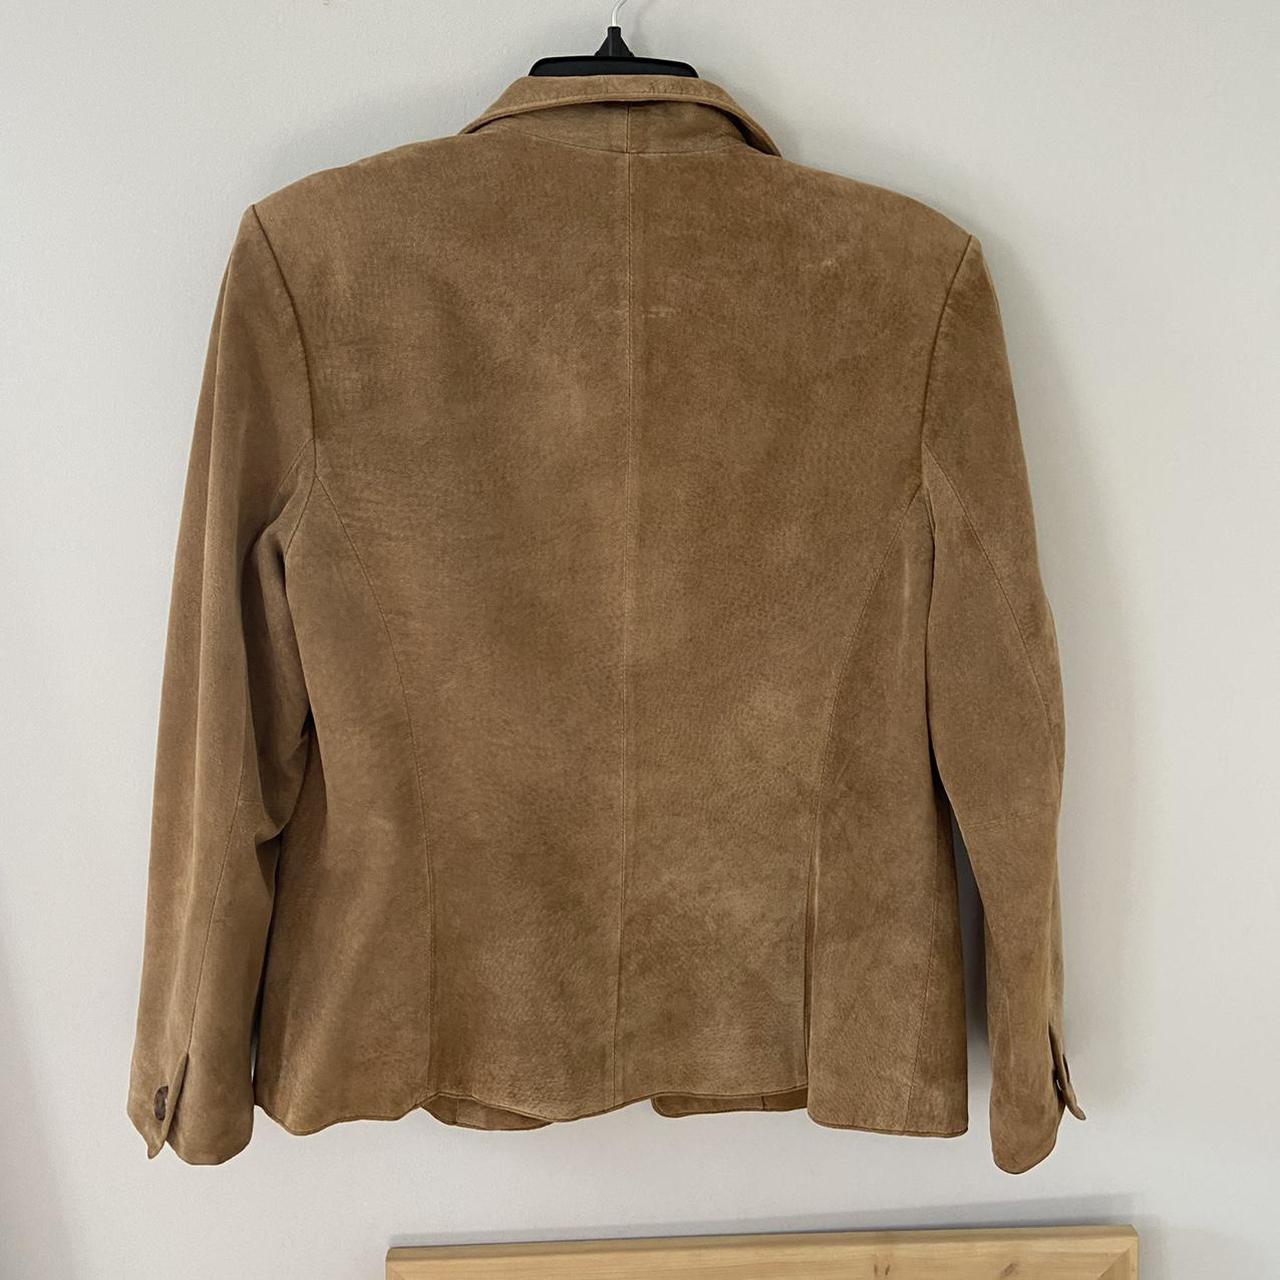 Product Image 4 - Light brown suede leather jacket.